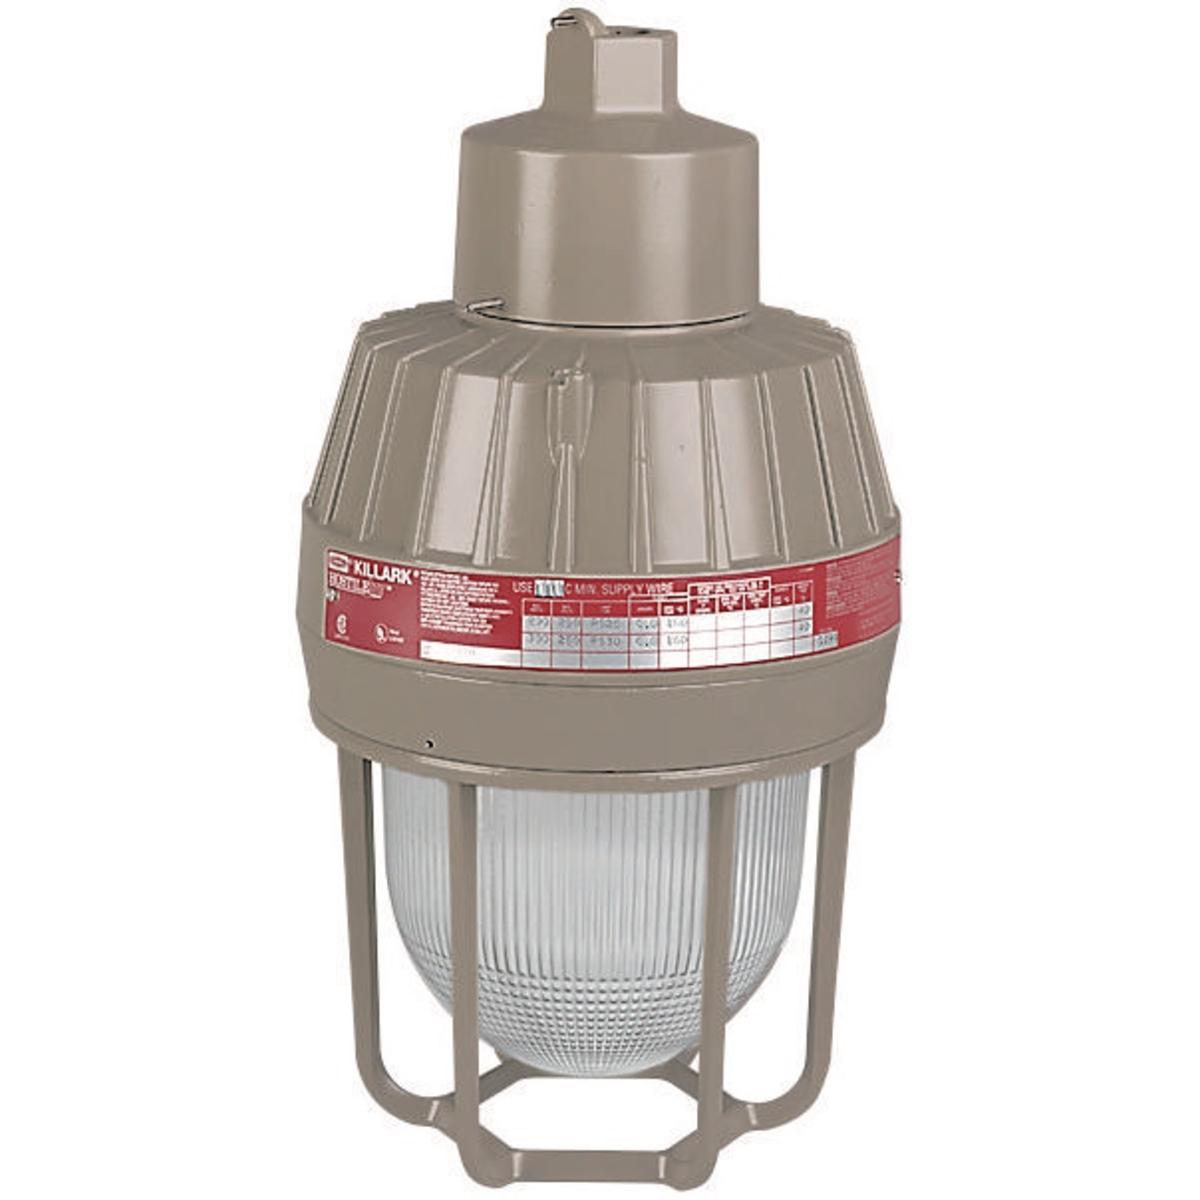 Hubbell EMS050A2 HID 50W HPS Quadri-Volt 3/4" Pendant  ; Four light sources—Incandescent, compact fluorescent, high pressure sodium and metal halide ; Mounting choice—Pendant, ceiling, 25˚ stanchion or 90˚ wall mount, all with “wireless” design that allows fast, easy fixt